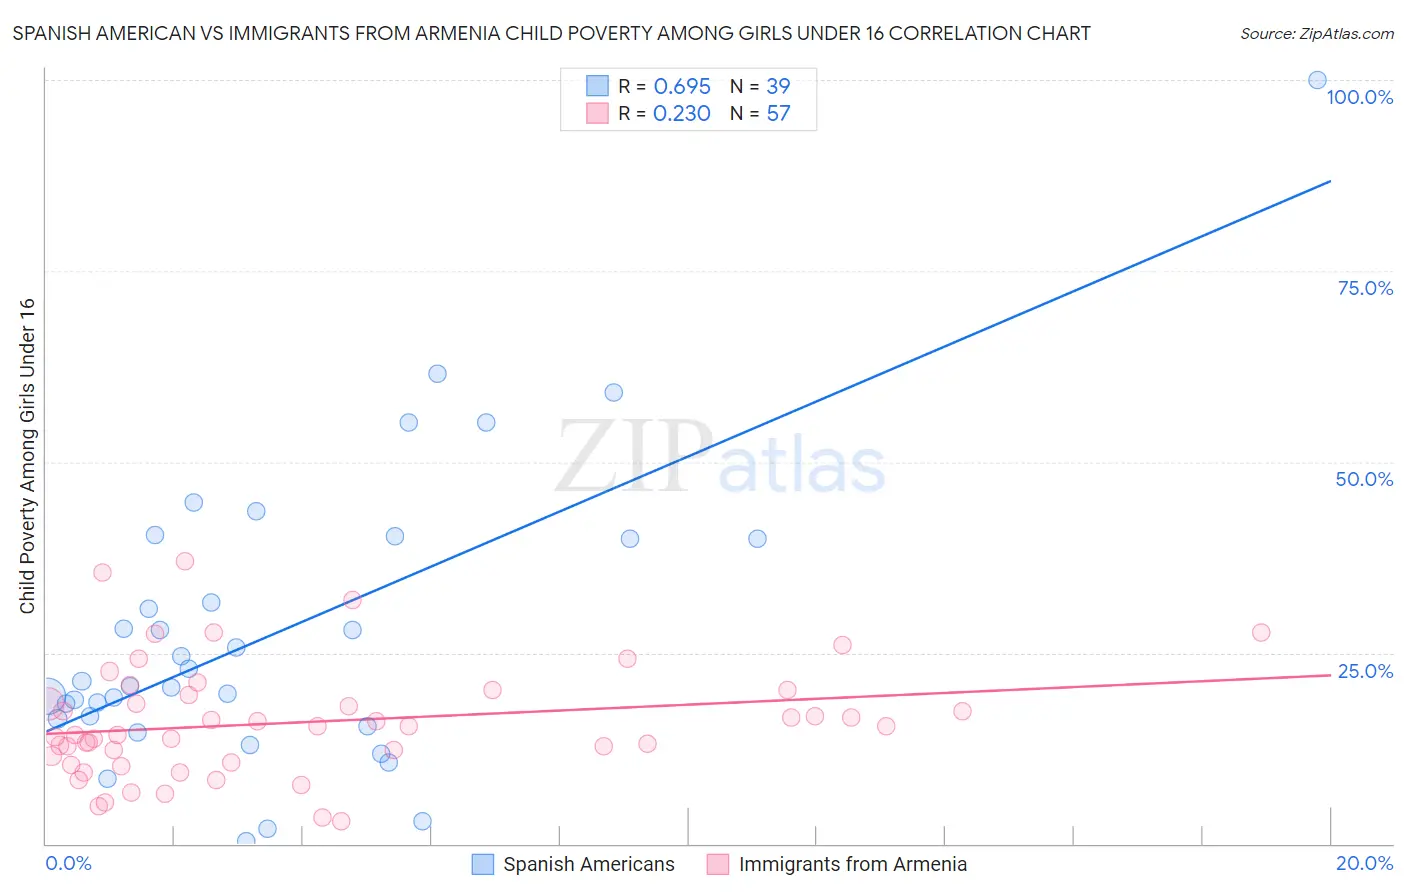 Spanish American vs Immigrants from Armenia Child Poverty Among Girls Under 16